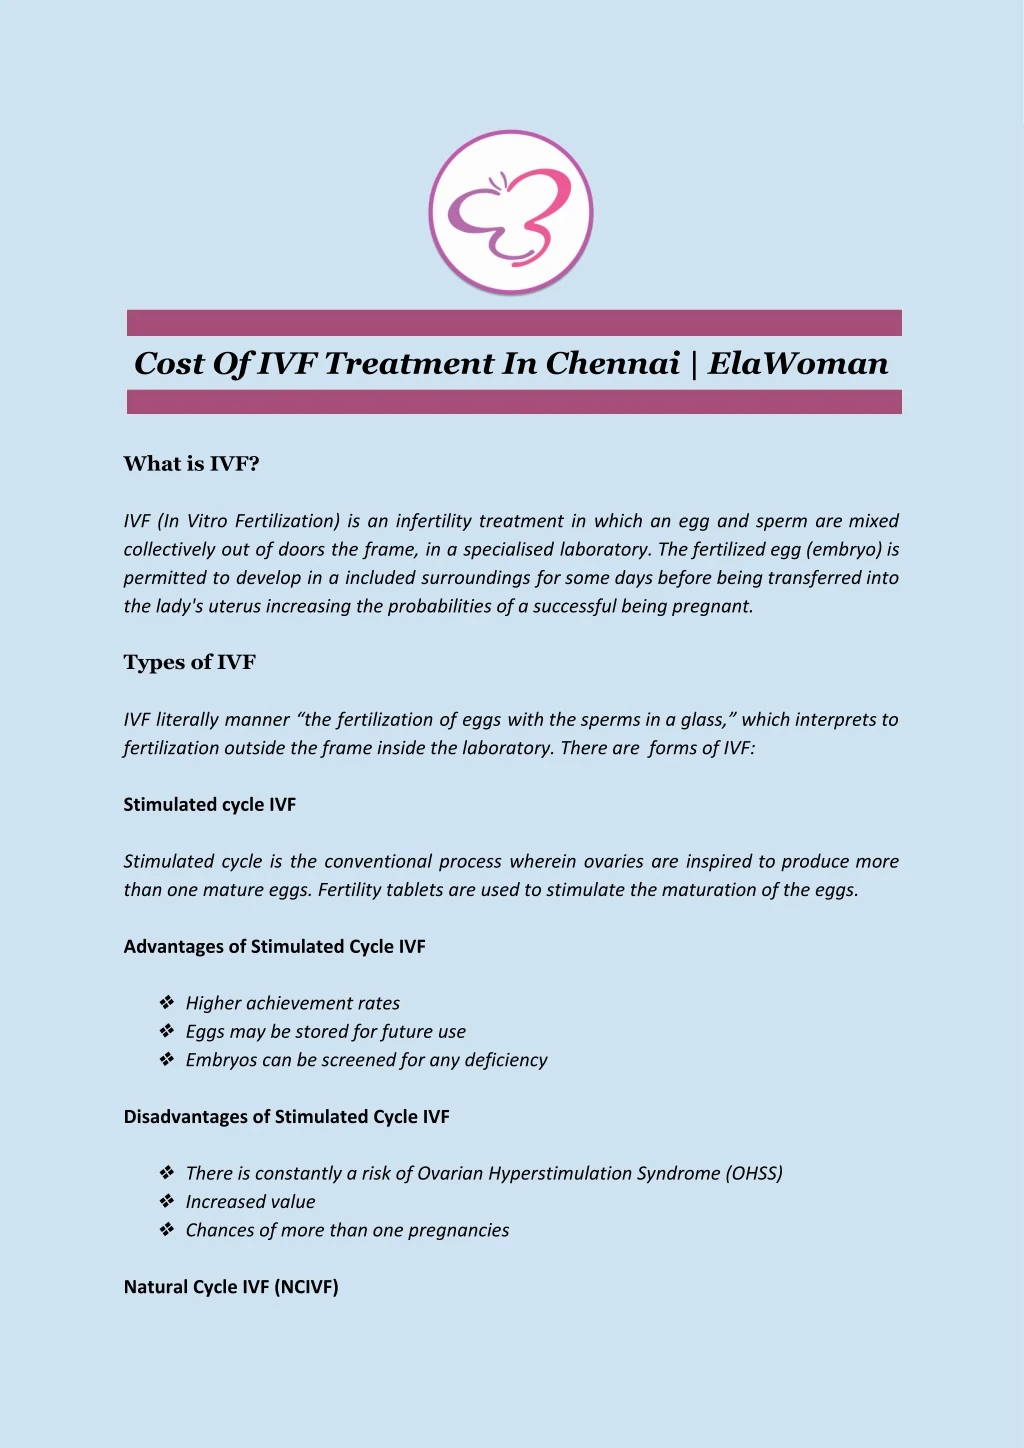 cost of ivf treatment in chennai elawoman